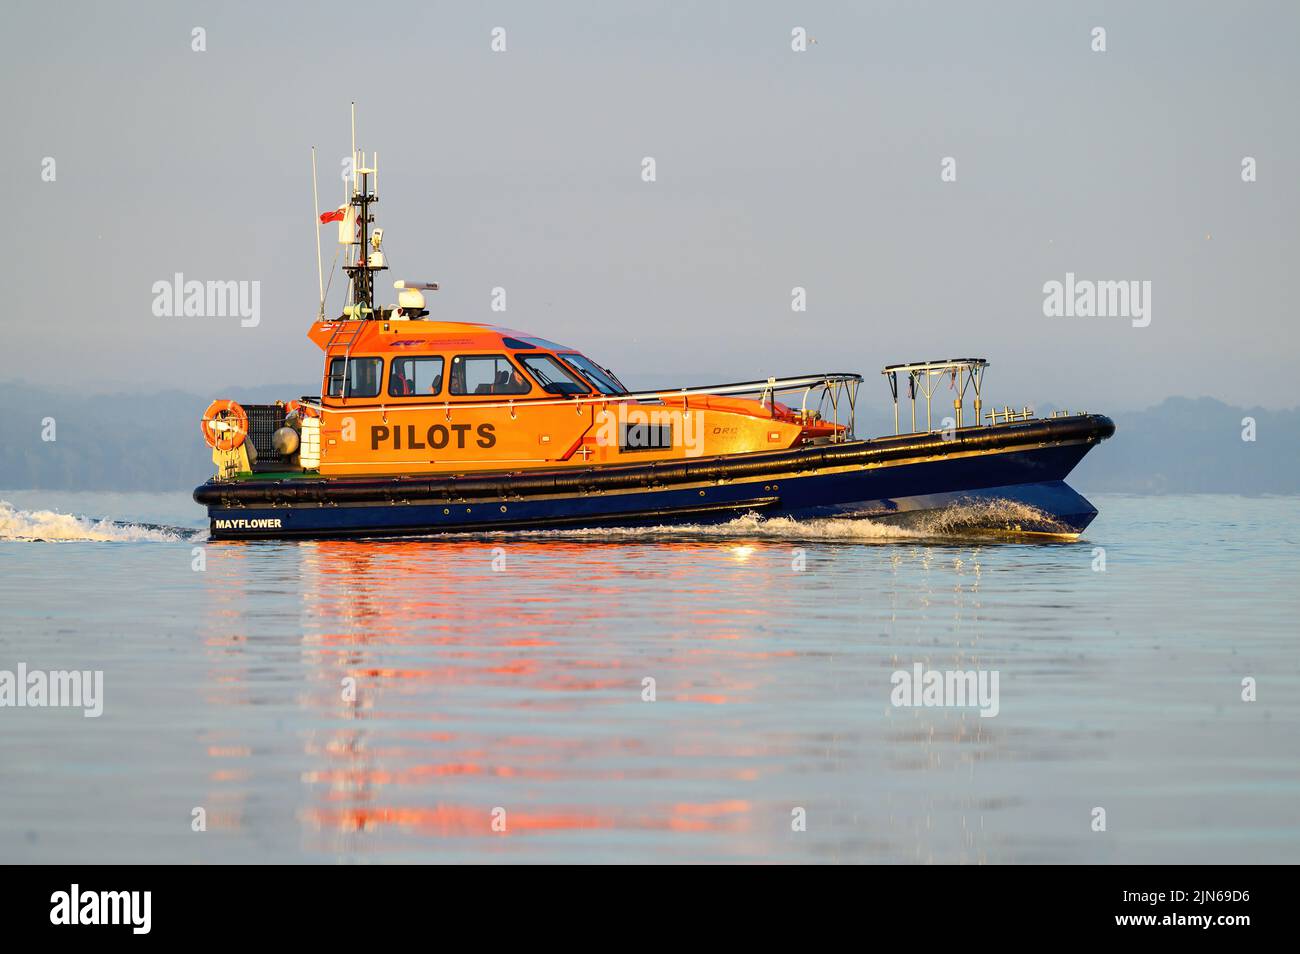 The pilot boat Mayflower operated by ABP Southampton - July 2022. Stock Photo